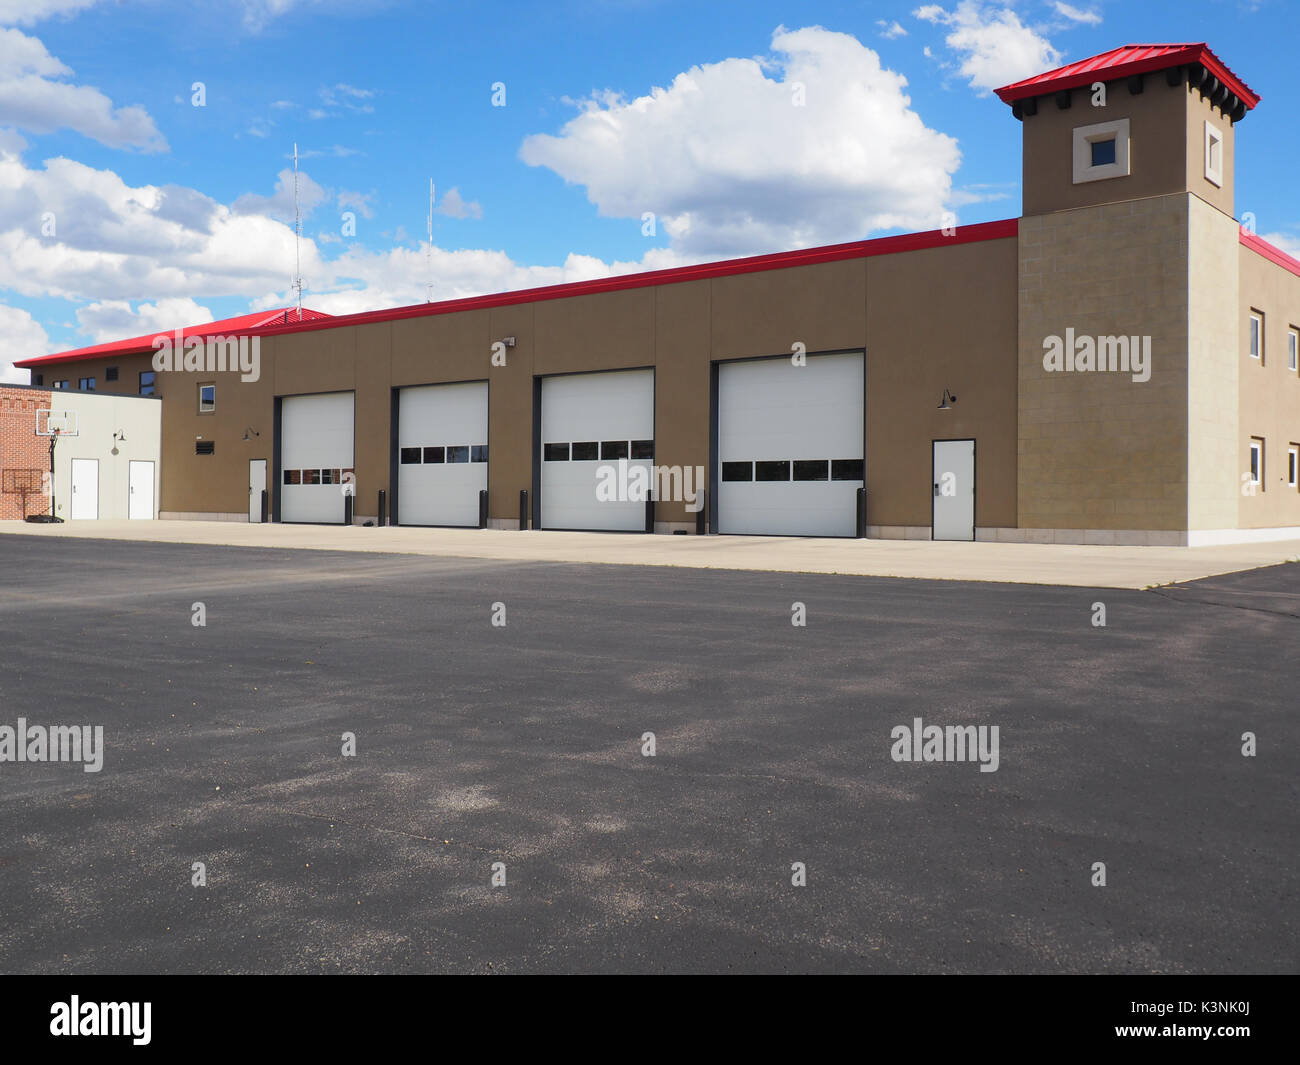 Several large closed garage doors for a small warehouse. Stock Photo